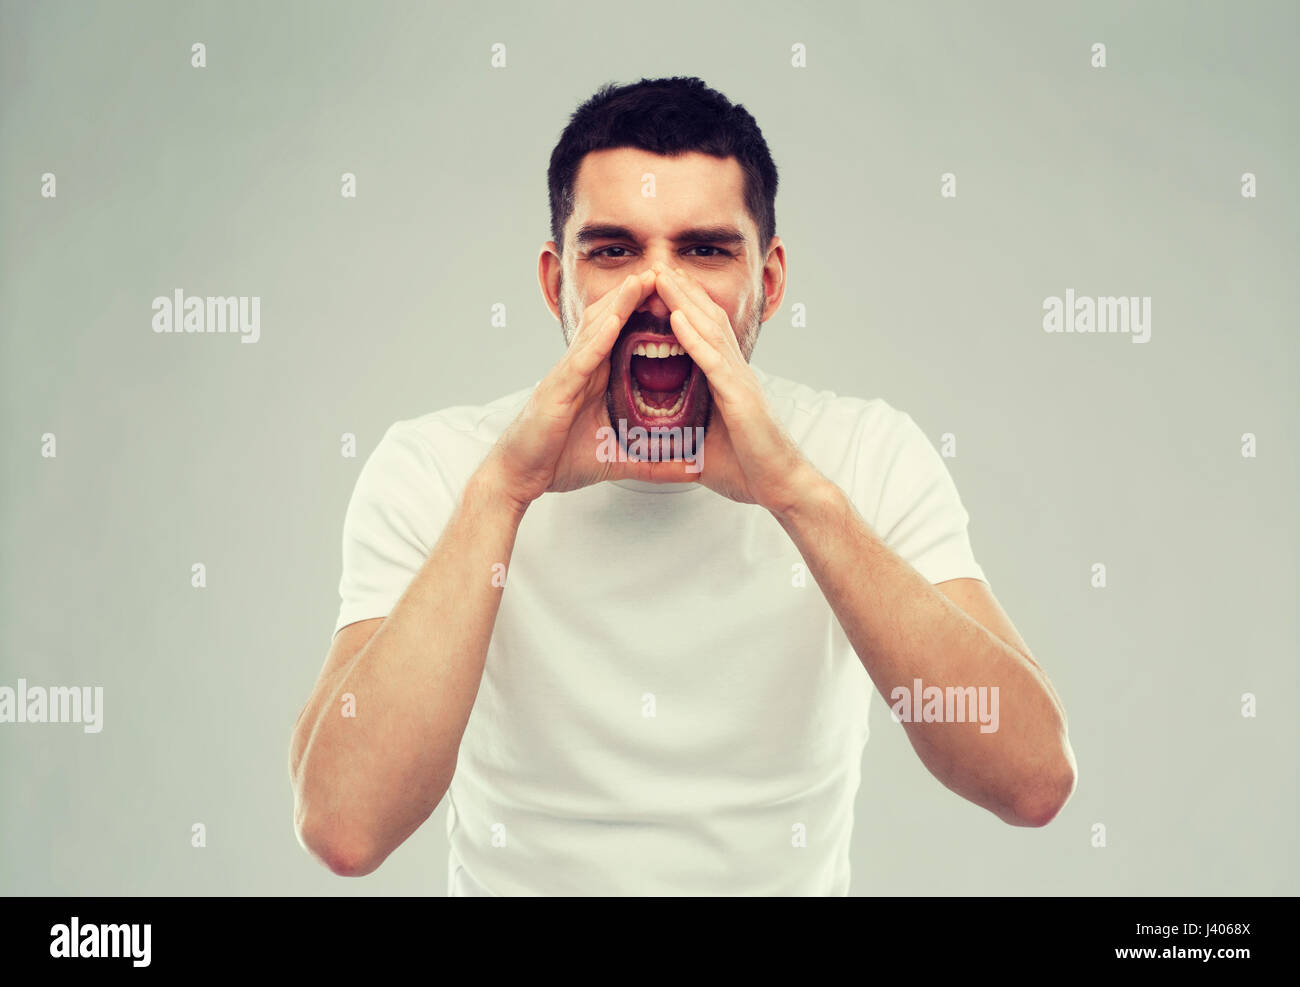 angry shouting man in t-shirt over gray background Stock Photo